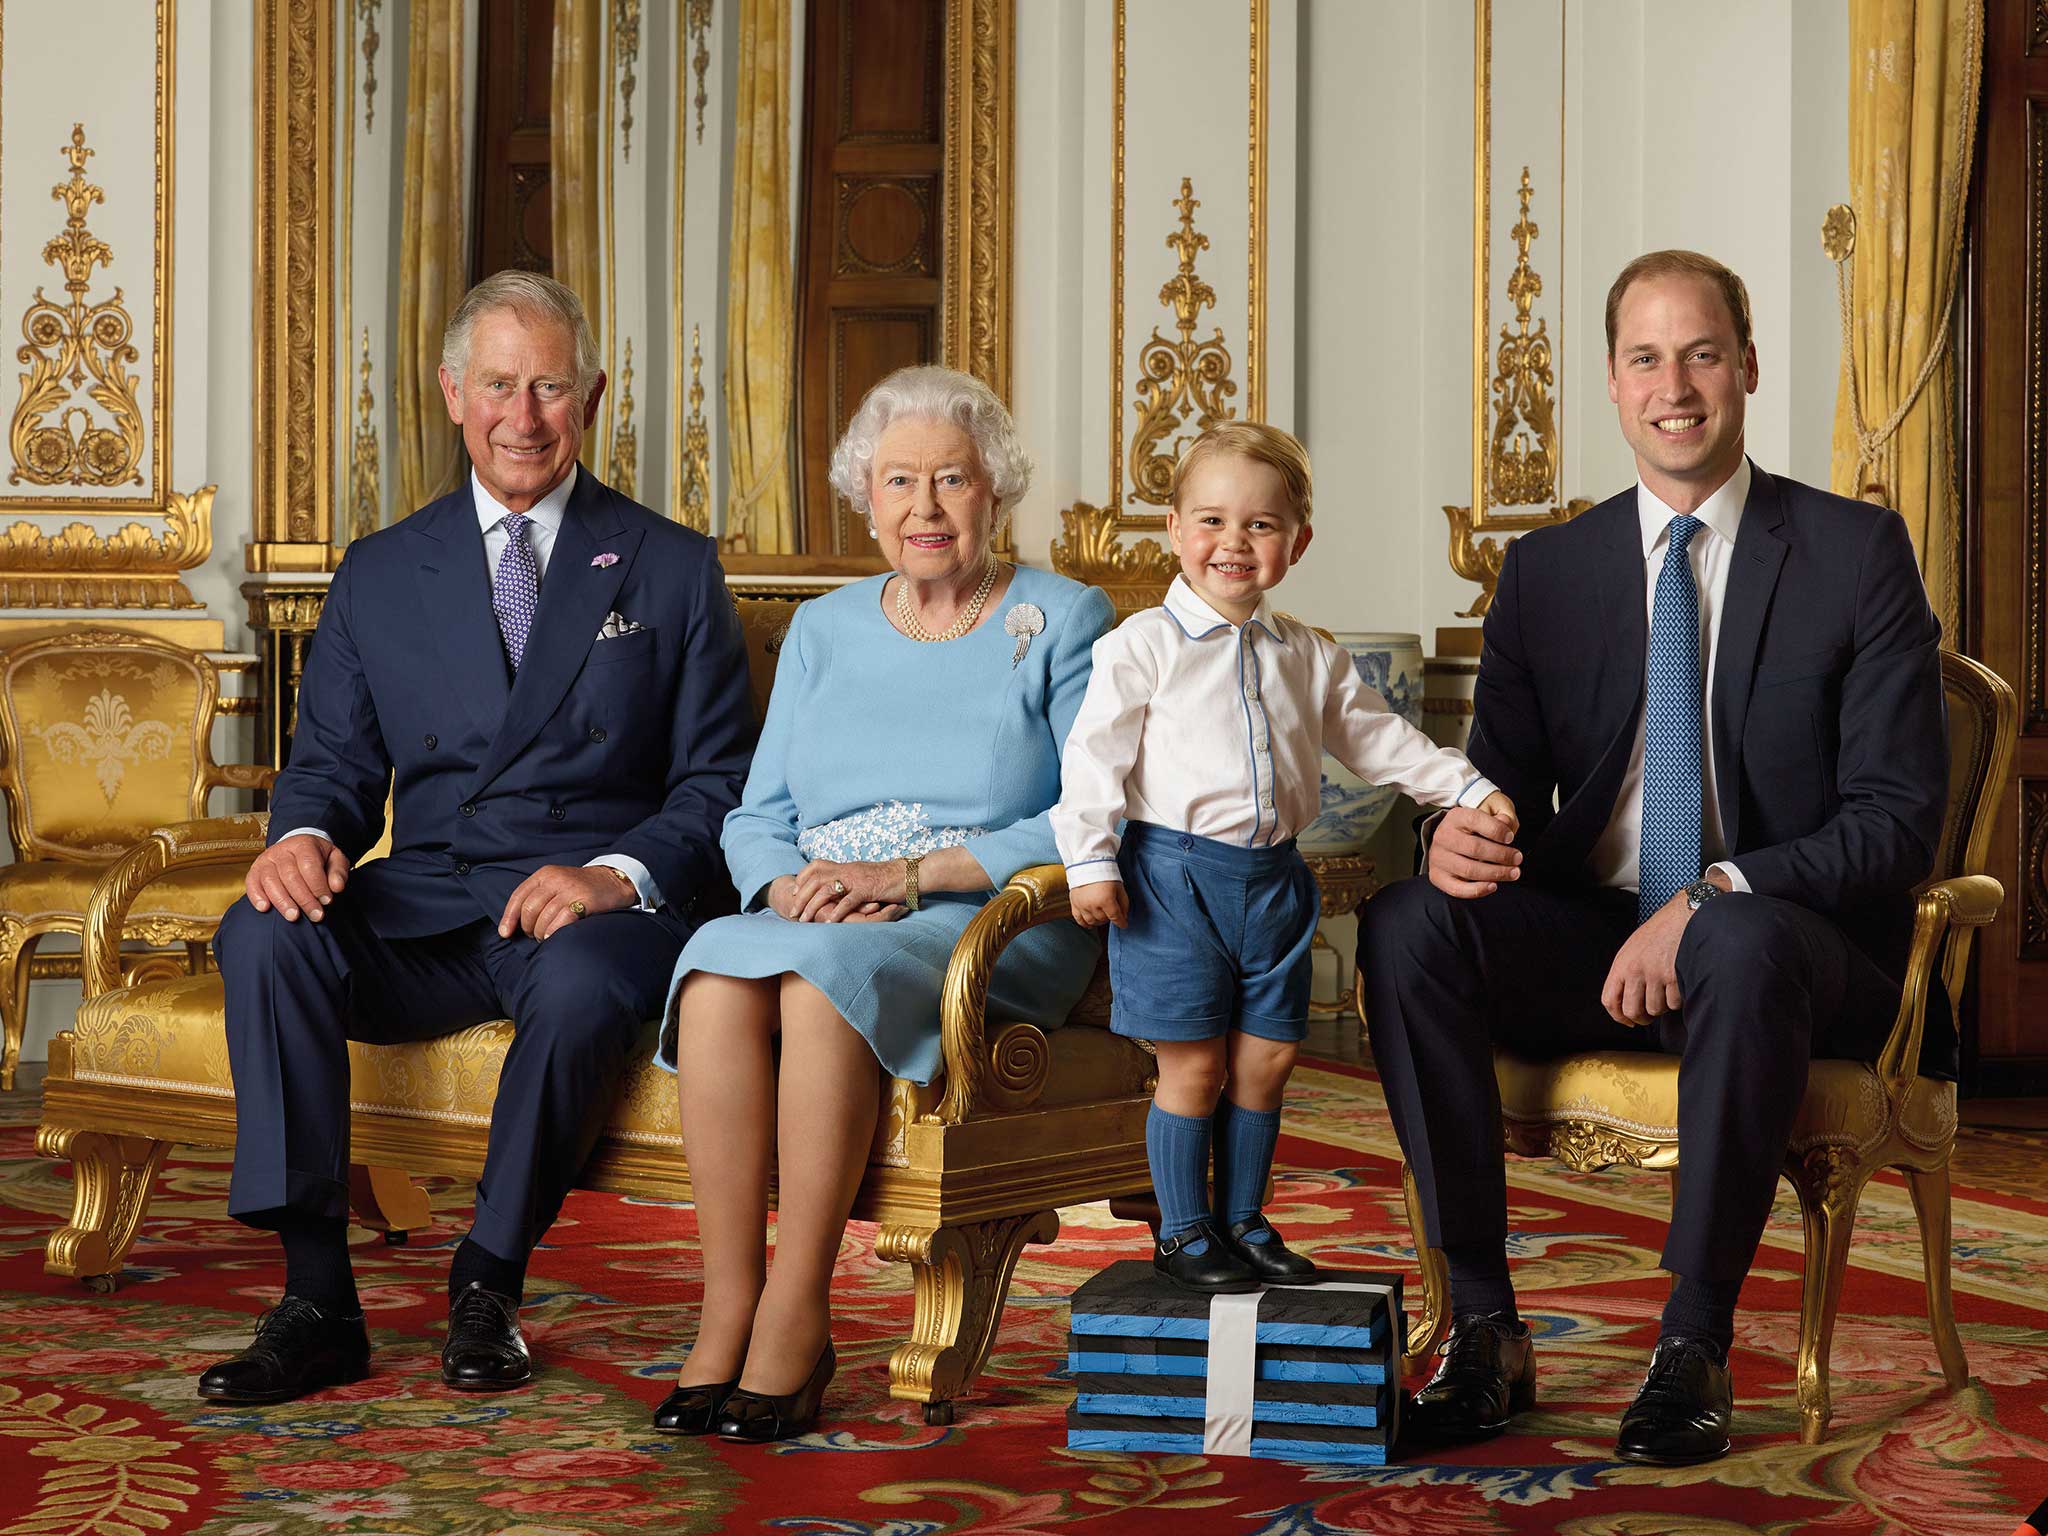 Prince George stands on foam blocks during a Royal Mail photoshoot for a stamp sheet to mark the 90th birthday of Queen Elizabeth II. The sheet features four generations of the Royal family, from left, the Prince of Wales, Queen Elizabeth II, Prince George and the Duke of Cambridge